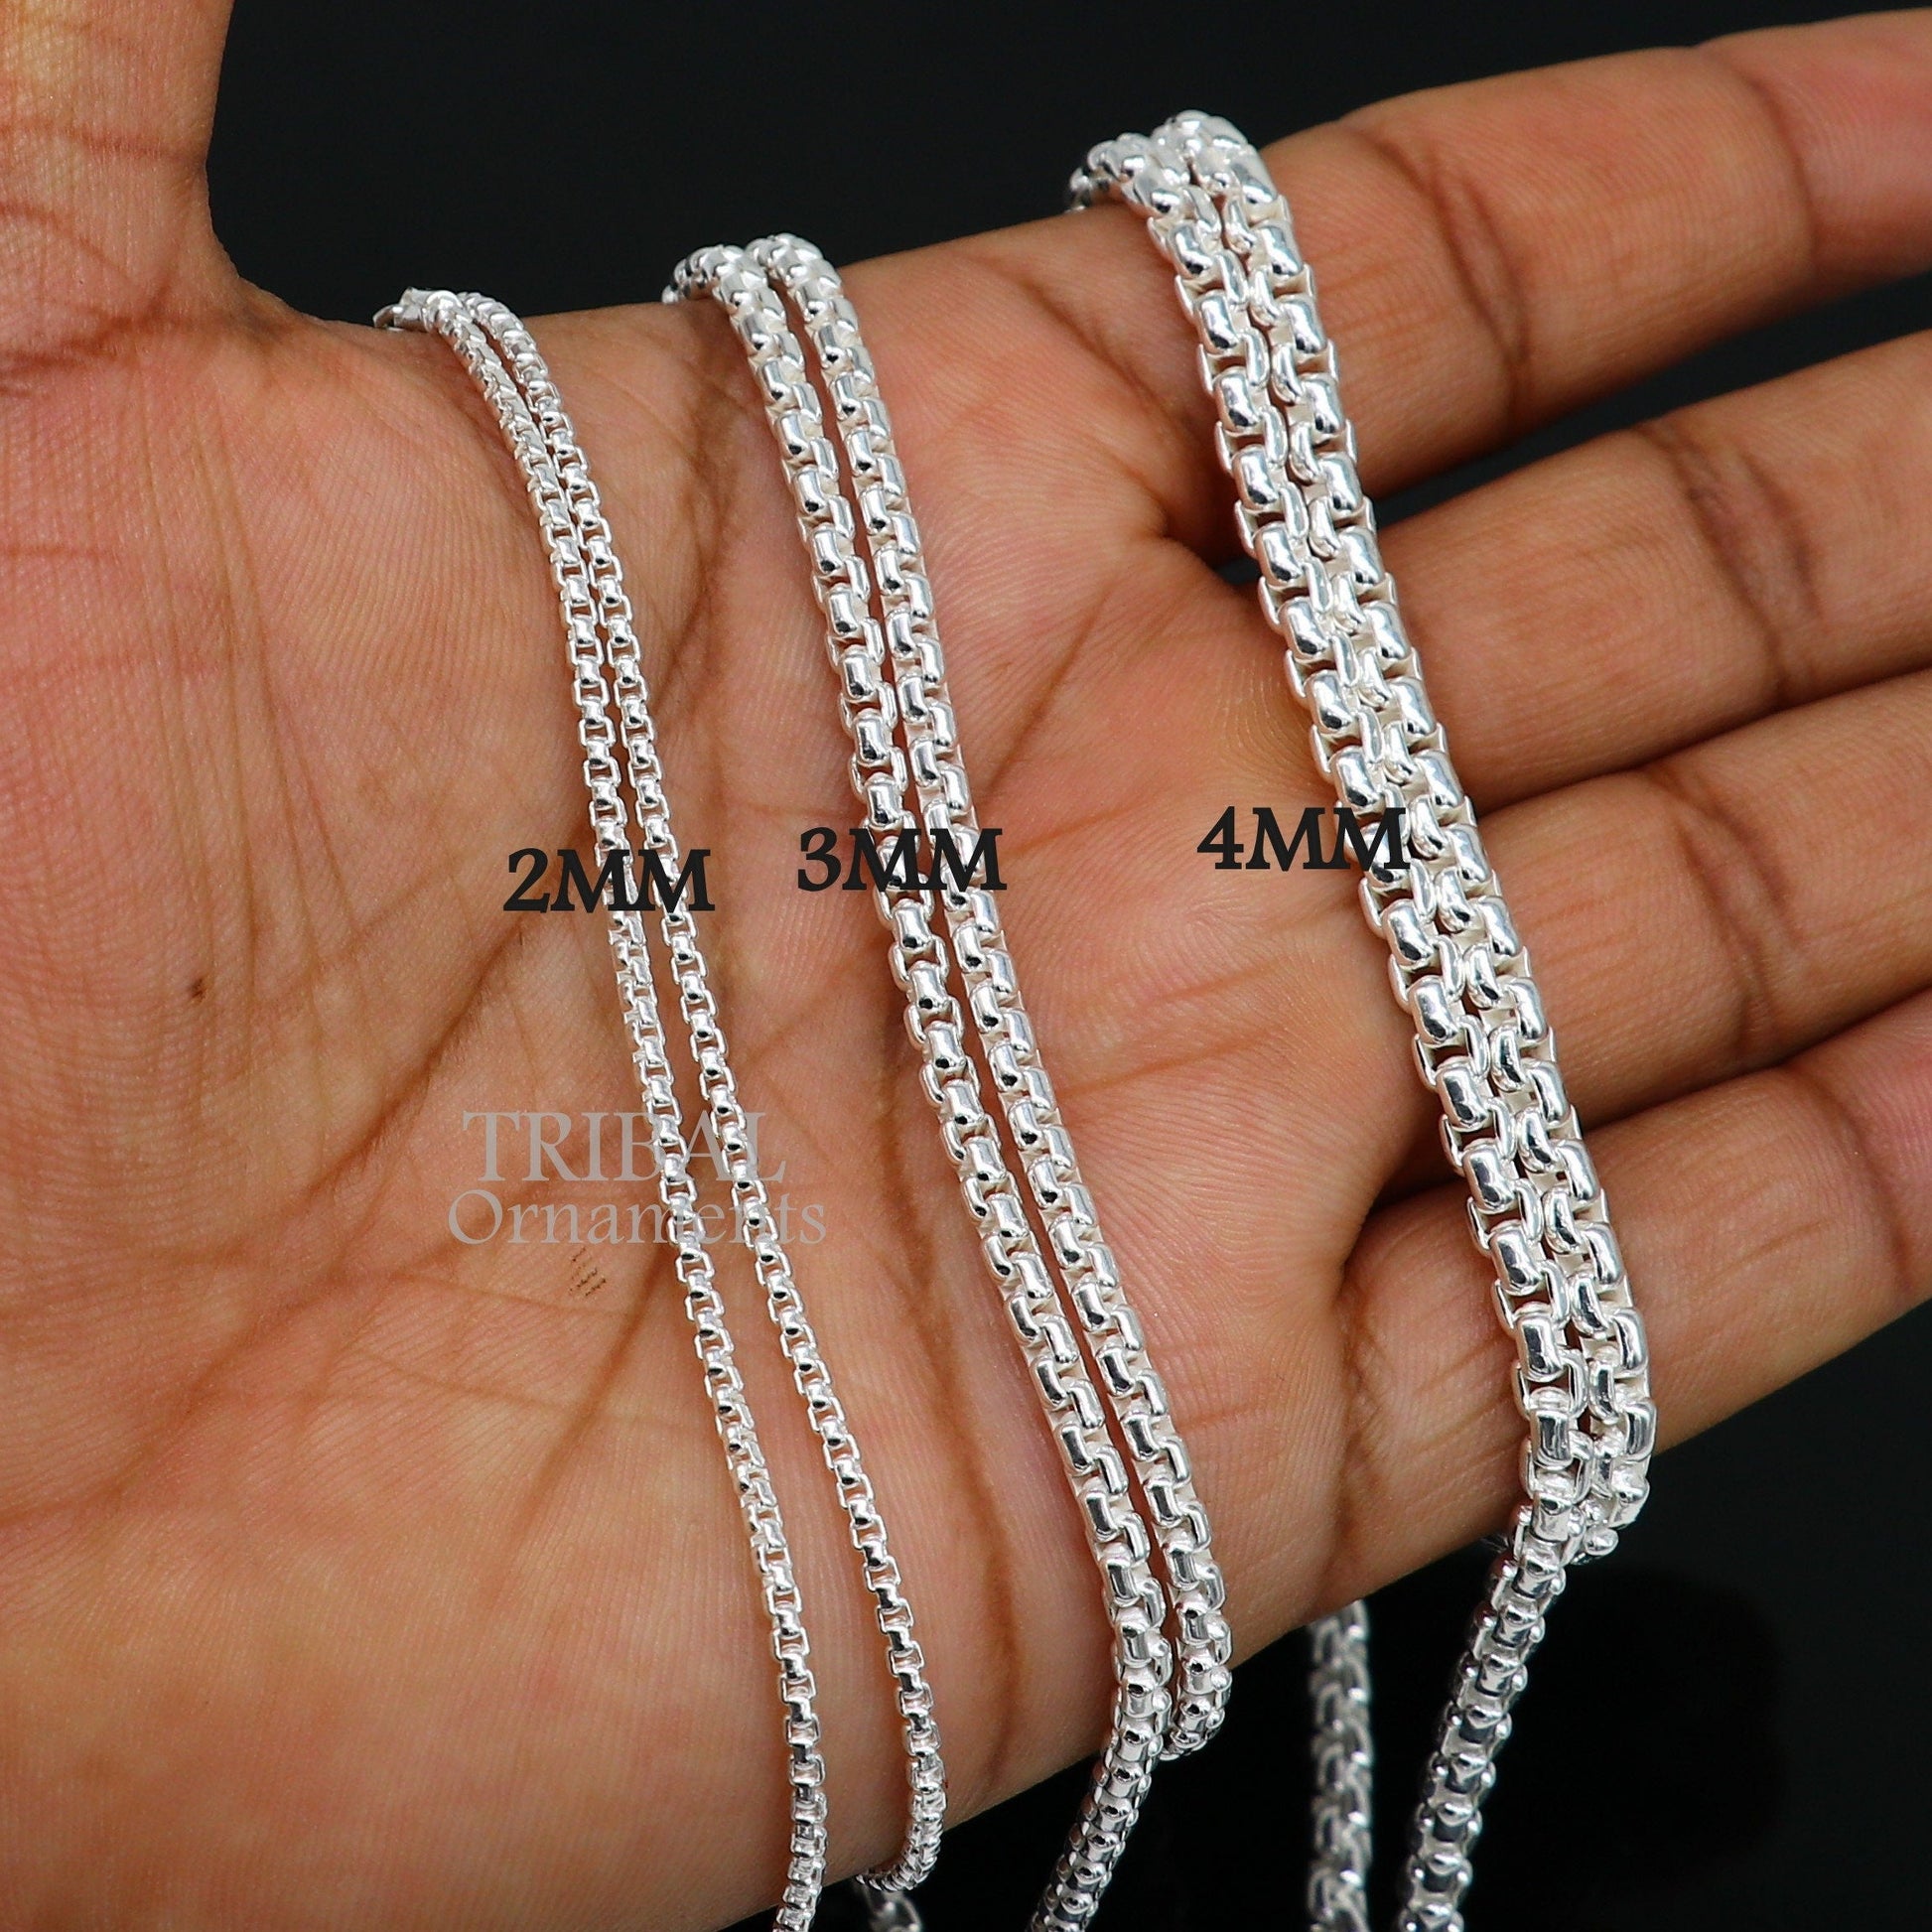 2/3/4mm 925 sterling silver handmade amazing delicate solid Rolo high quality chains necklace, best gifting unisex necklace chain ch225 - TRIBAL ORNAMENTS